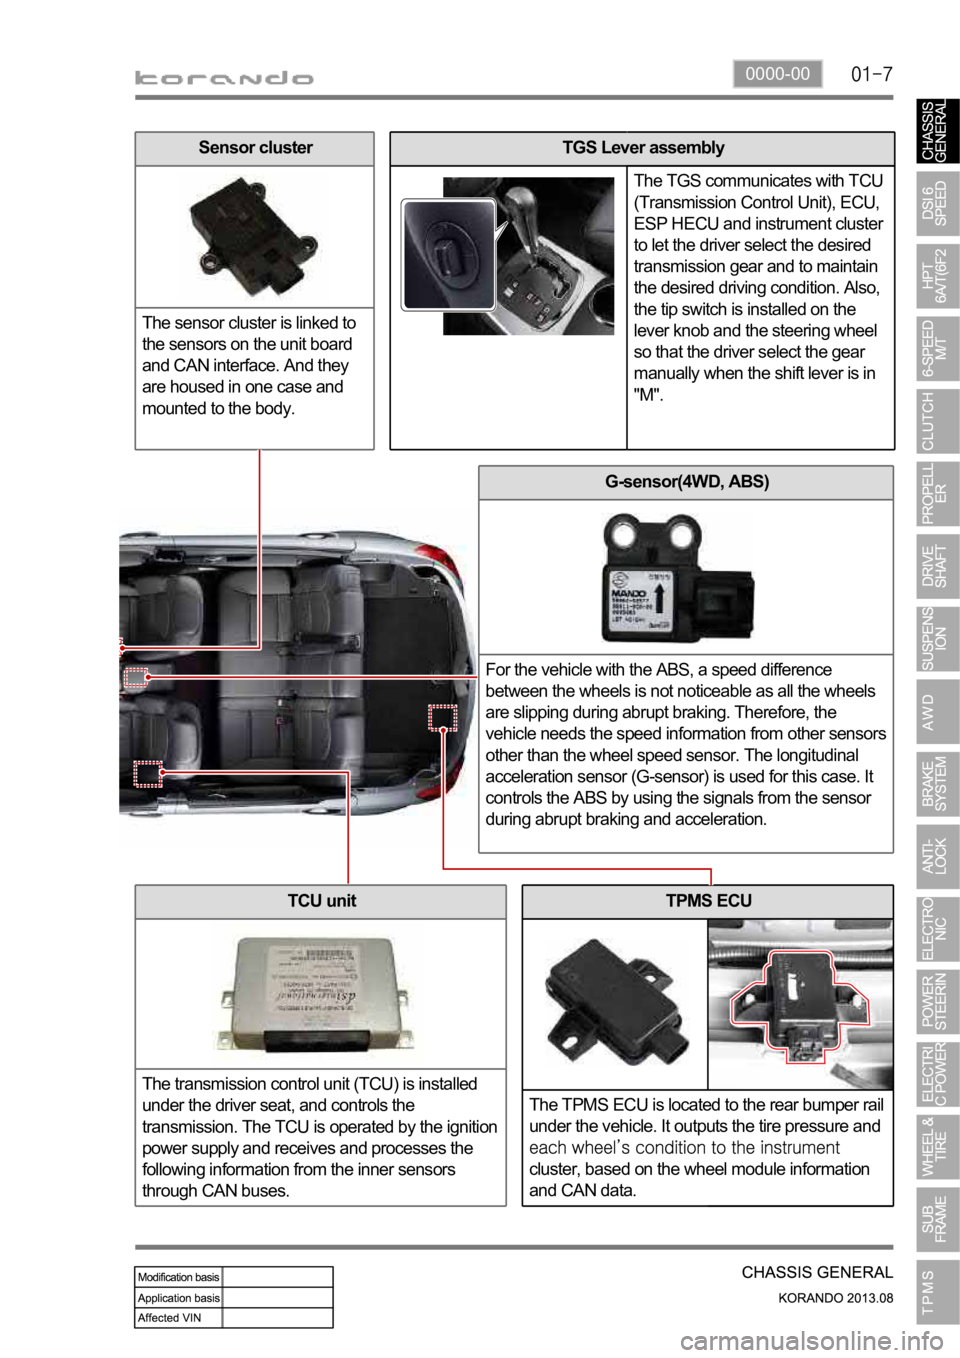 SSANGYONG KORANDO 2013 Owners Guide 0000-00
TPMS ECU
The TPMS ECU is located to the rear bumper rail 
under the vehicle. It outputs the tire pressure and 
cluster, based on the wheel module information 
and CAN data.
G-sensor(4WD, ABS)
